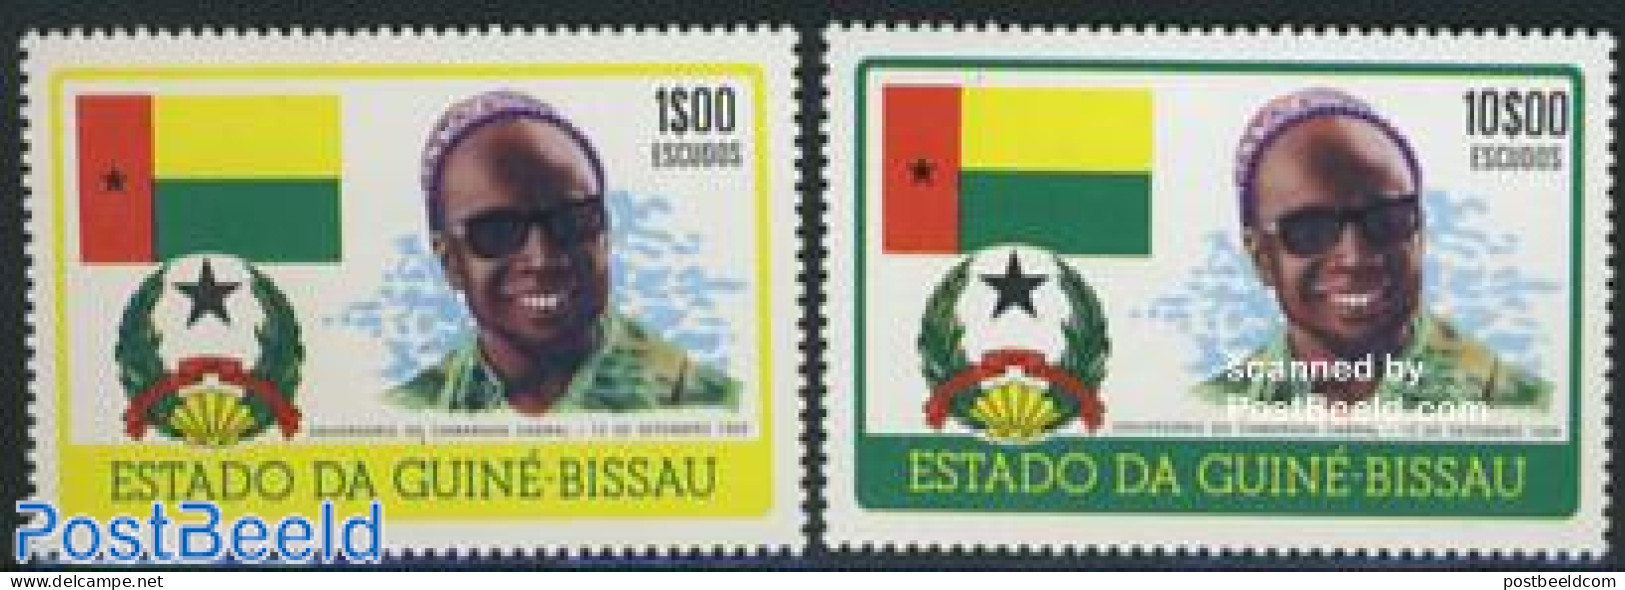 Guinea Bissau 1975 Amilcar Cabral 2v, Mint NH, History - Coat Of Arms - Flags - Politicians - Guinea-Bissau